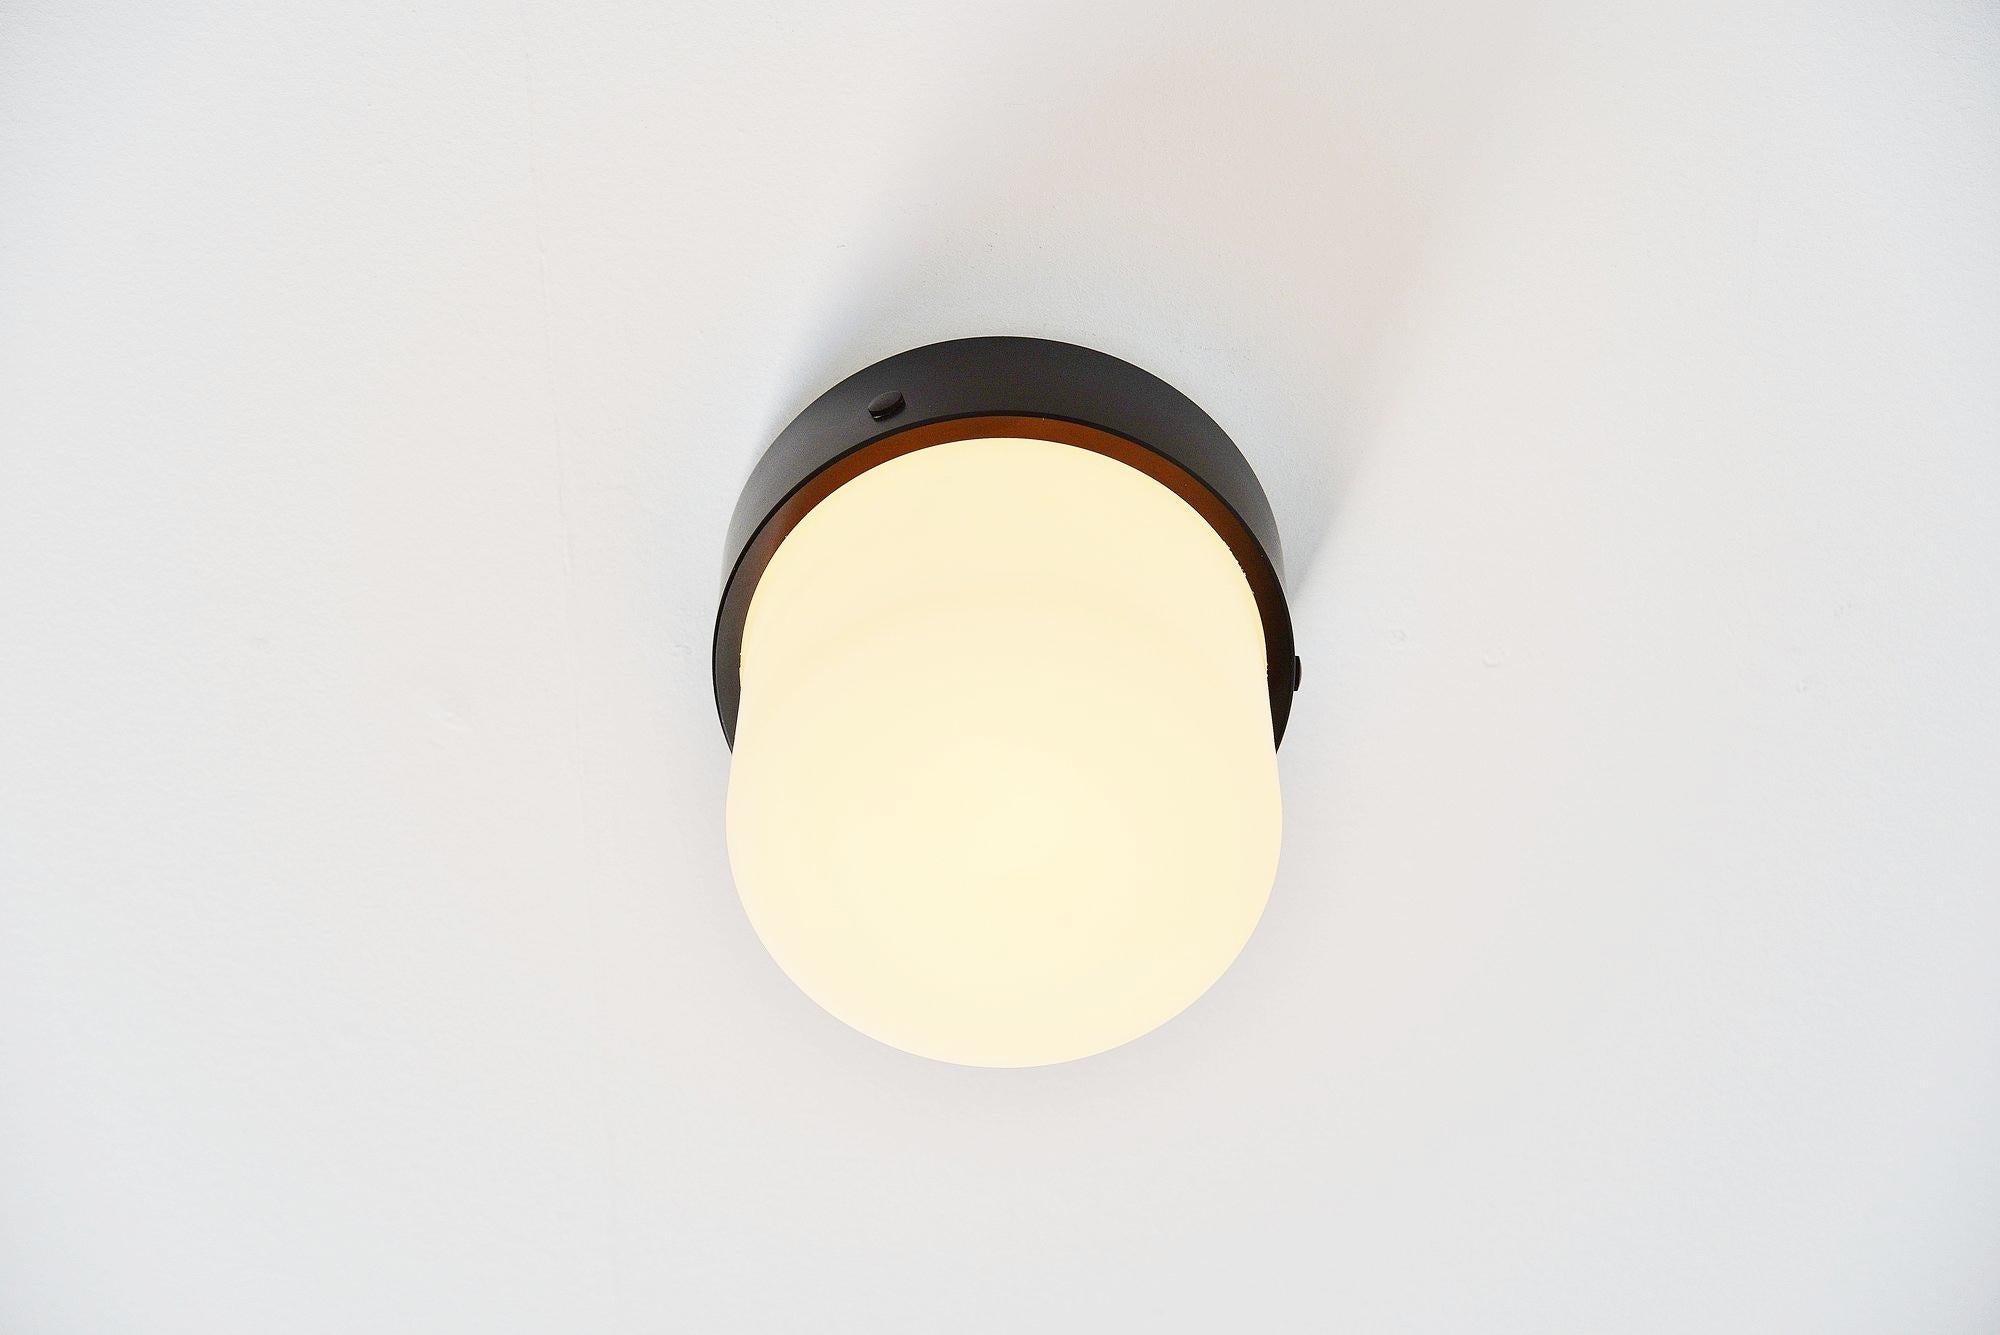 Pair of minimalist ceiling lamps model 3030 designed by Gino Sarfatti, manufactured by Arteluce, Italy, 1950. This light exists in 3 parts, a white painted base, with a black painted aluminium diffuser ring and a white milk glass shade. This lamp is